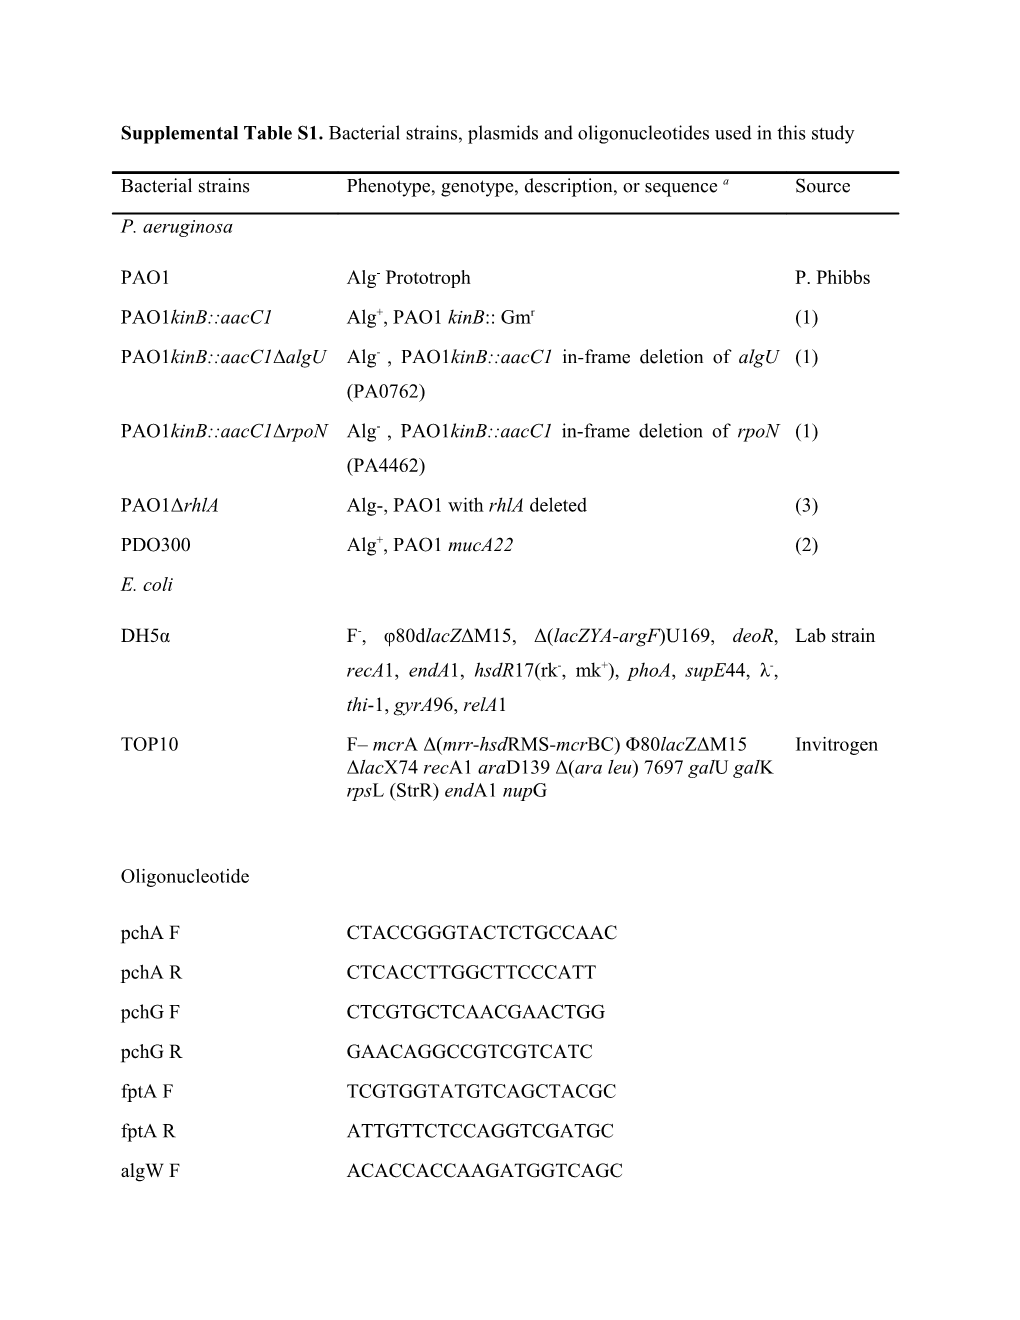 Supplemental Table S1. Bacterial Strains, Plasmids and Oligonucleotides Used in This Study